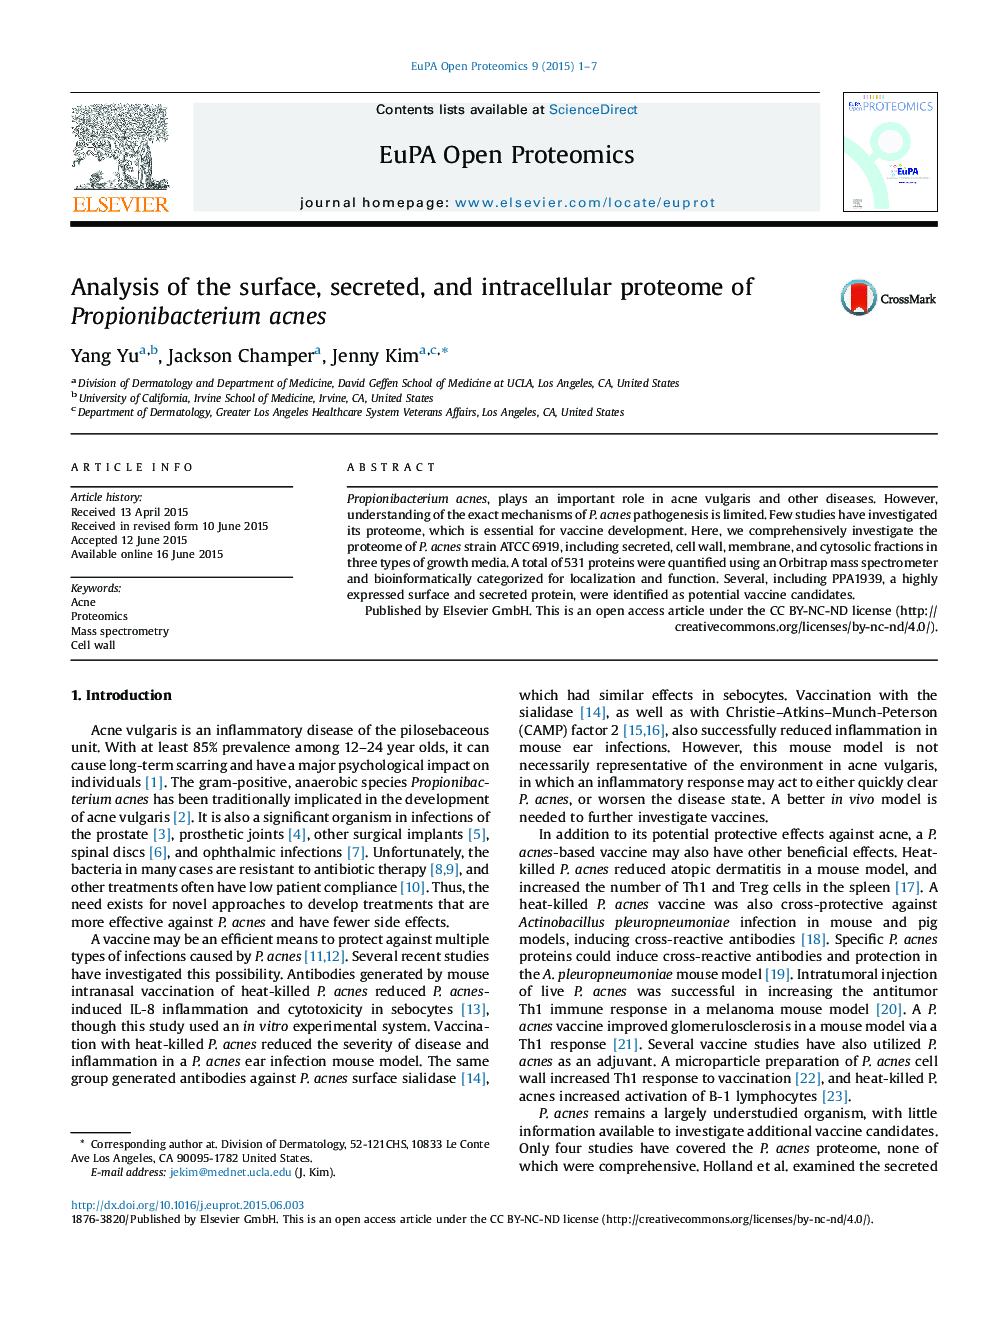 Analysis of the surface, secreted, and intracellular proteome of Propionibacterium acnes